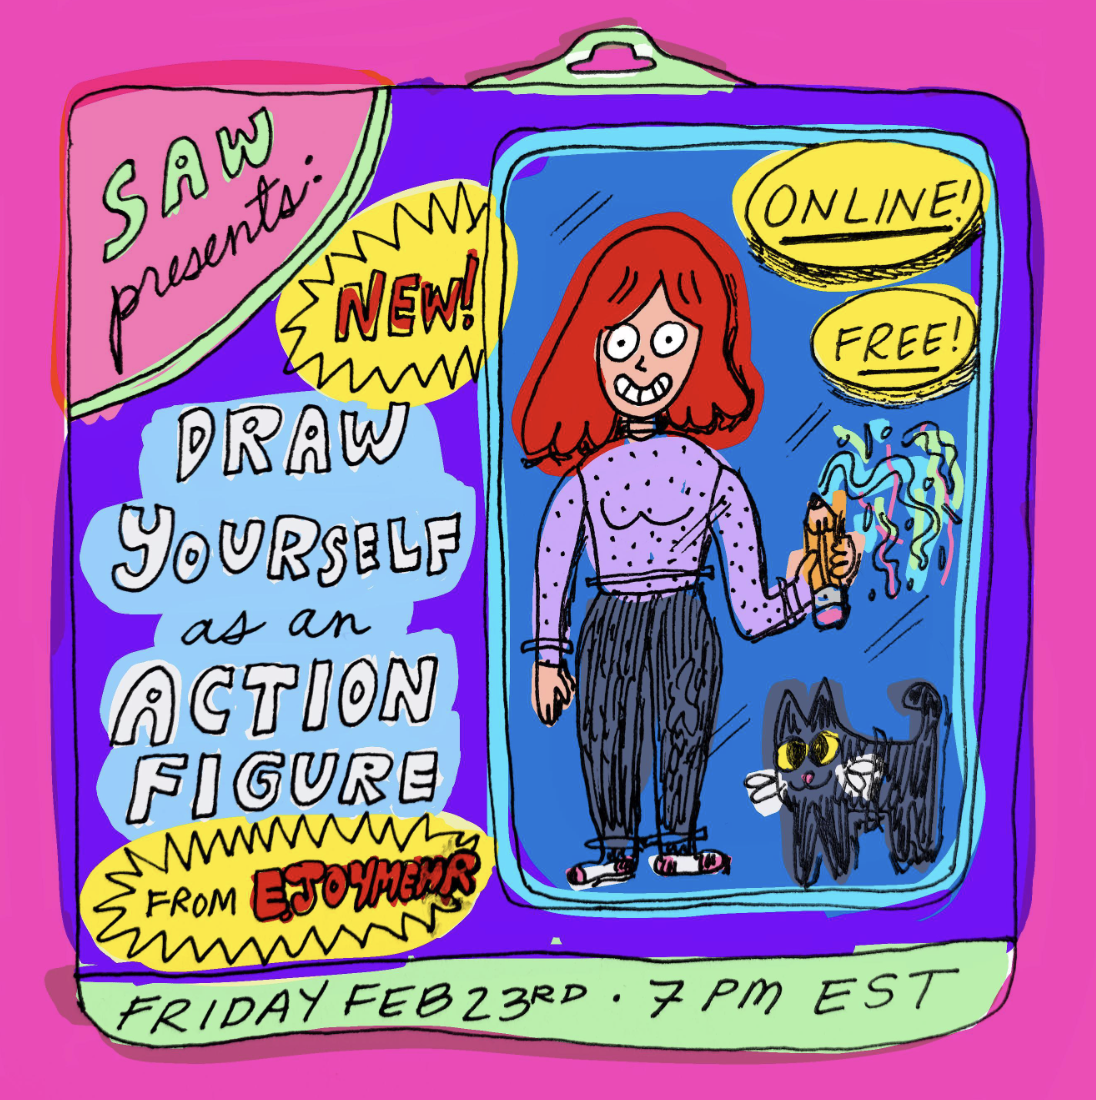 A person with red shoulder-length hair stands like an action figure inside a toy box. They are smiling widely and holding a large pencil; a black cat stands near their feet. Text reads: "SAW presents: NEW! Draw Yourself as an Action Figure from E. Joy Mehr, Friday Feb 23rd, 7 p.m. EST, Online! Free!" Everything is rendered in bright, highly saturated colors.